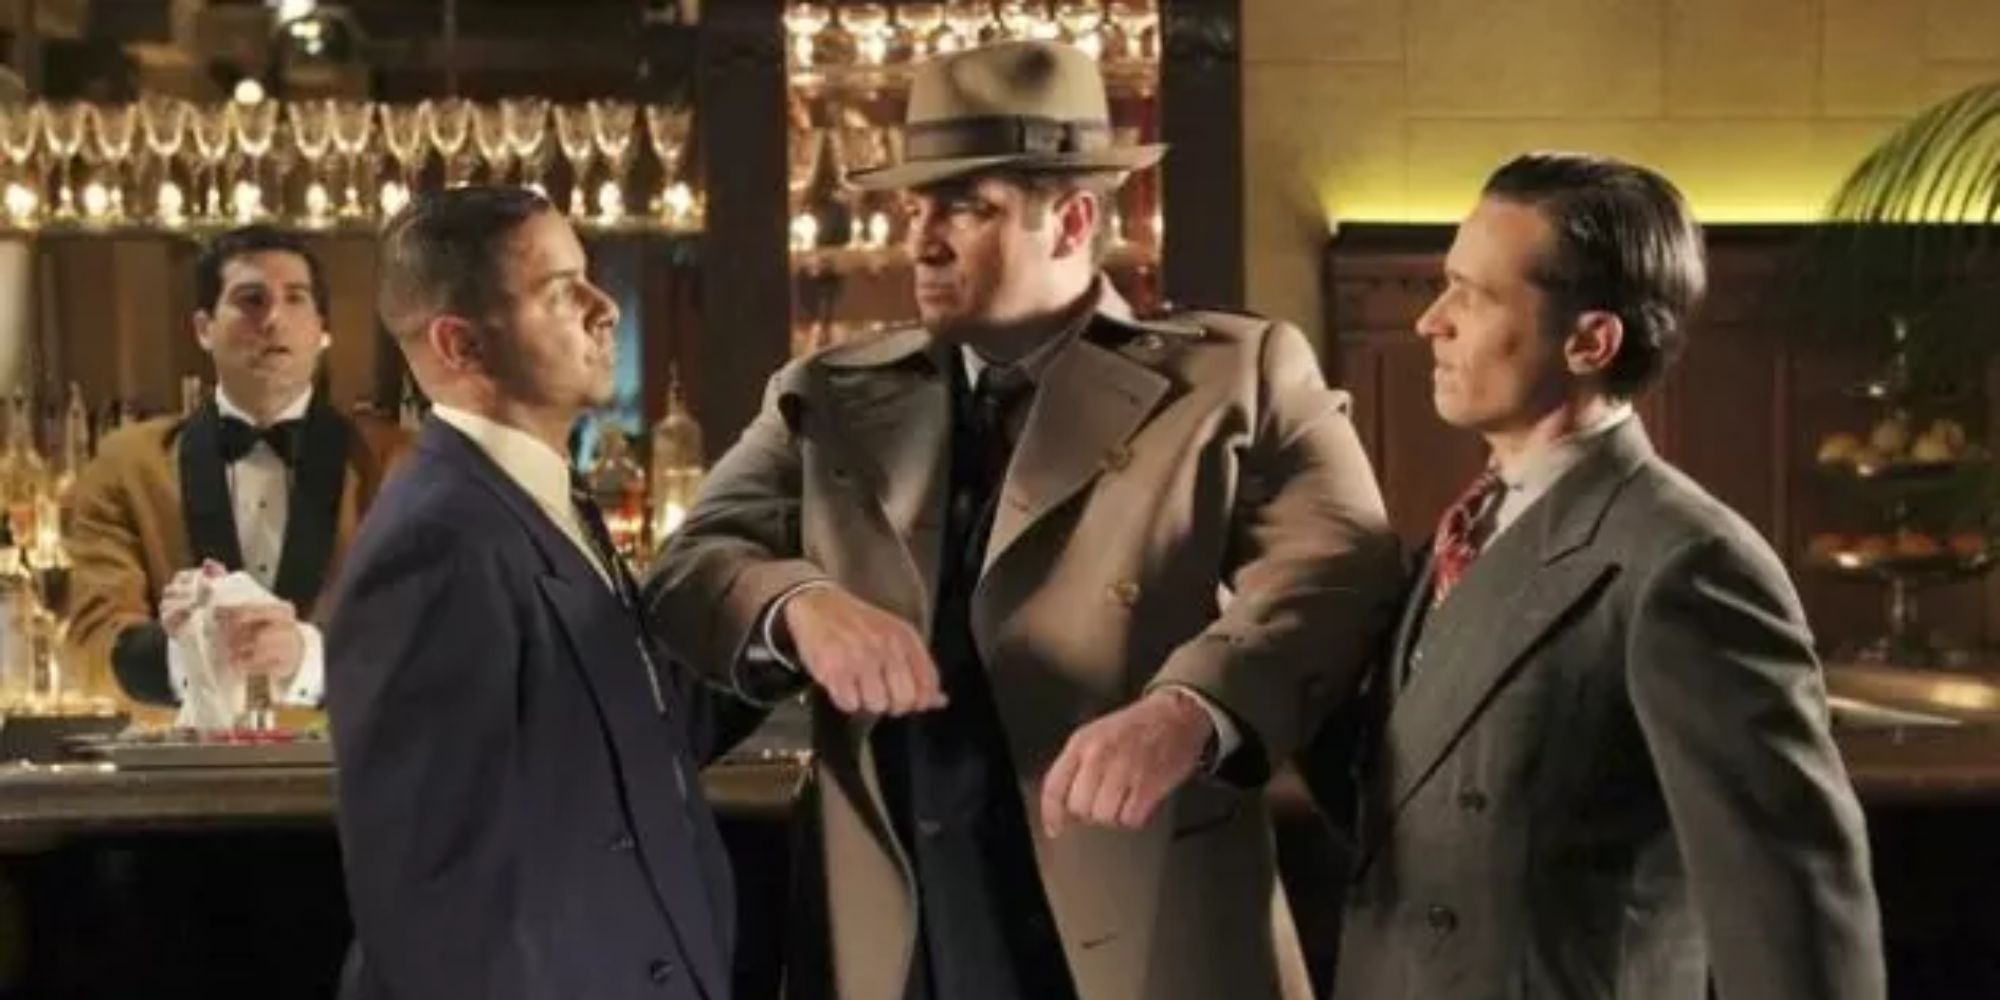 Castle as PI Joe Flynn gives a stern look to two mob henchmen